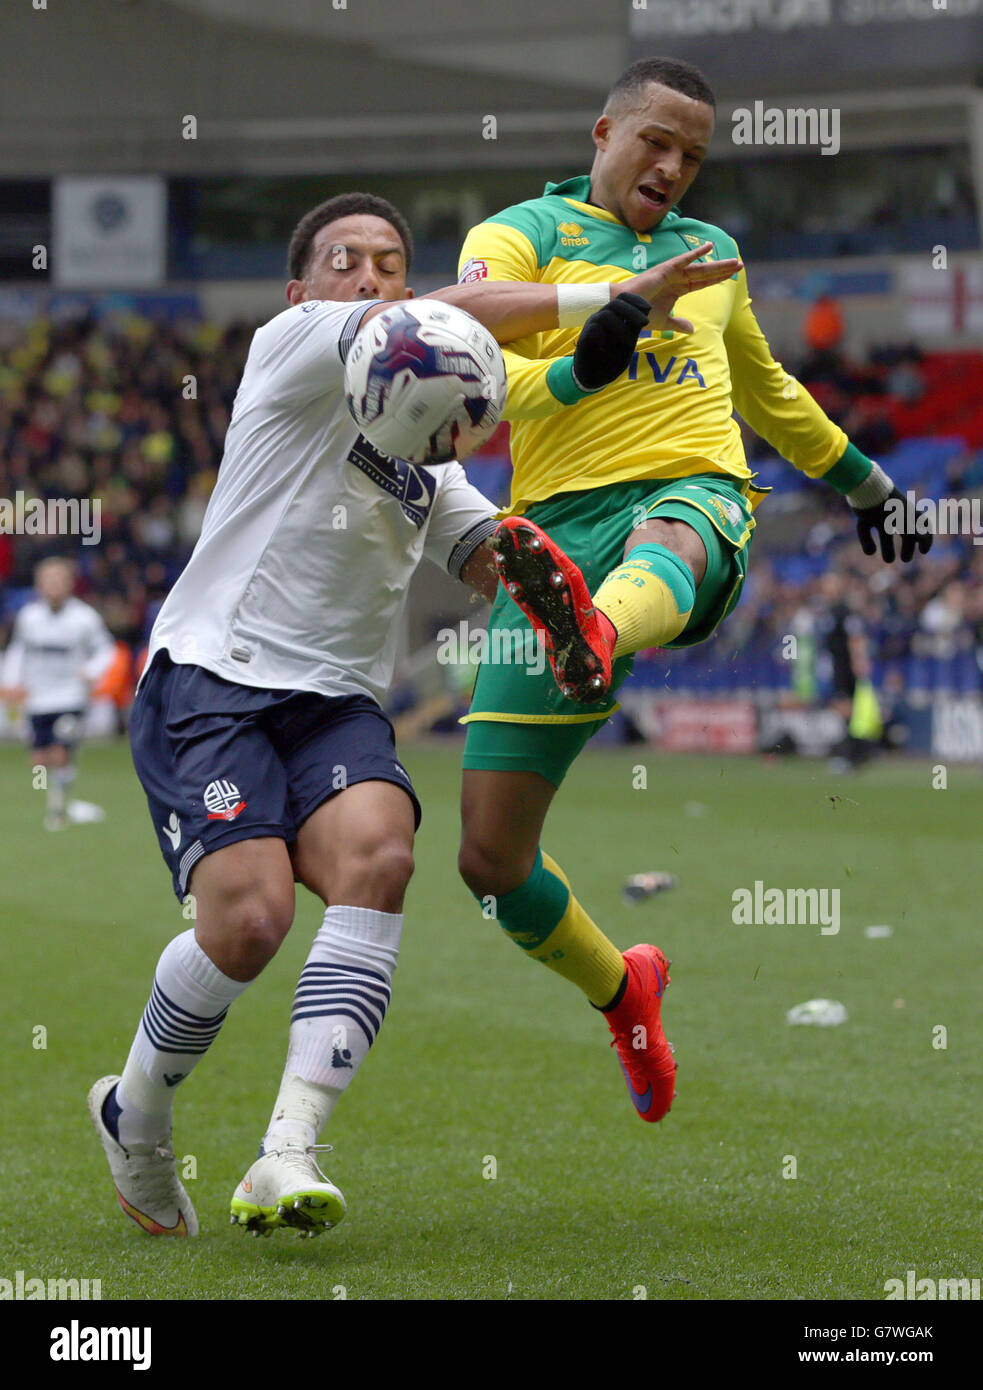 Bolton Wanderers' Liam Feeney (left) attempts to bloke a cross by Norwich City's Nathan Redmond during the Sky Bet Championship match at the Macron Stadium, Bolton. Stock Photo